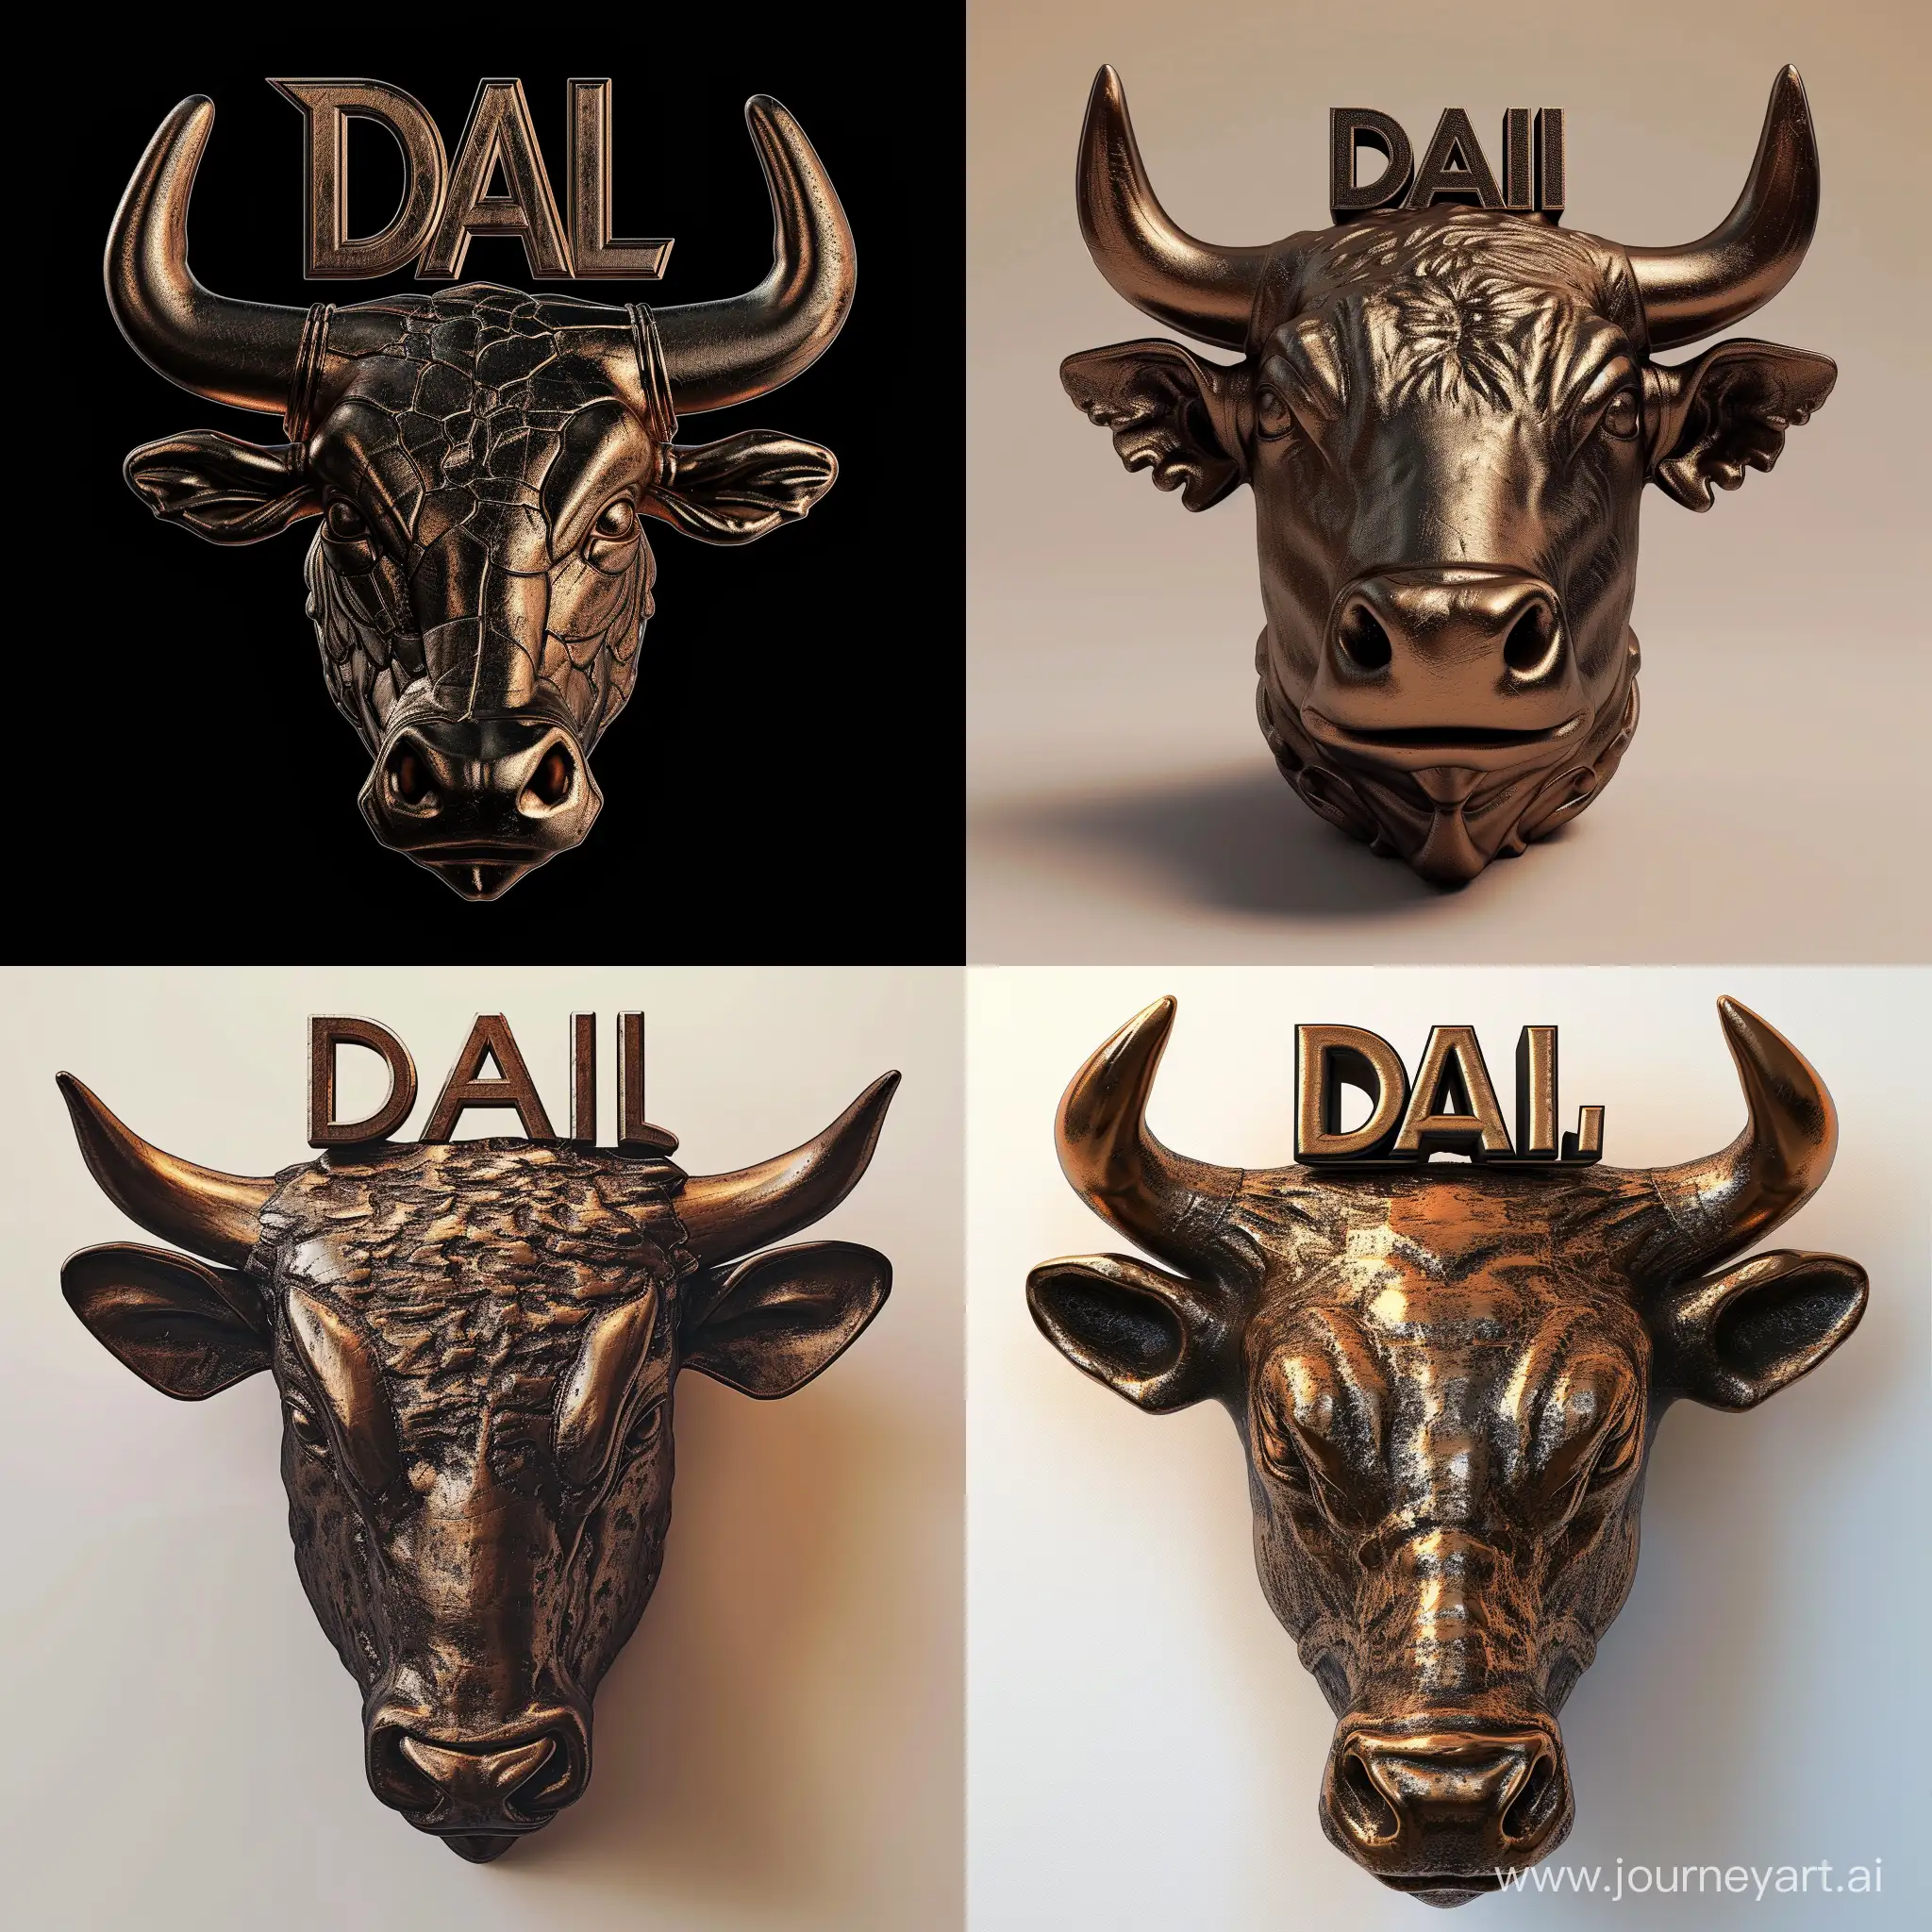 Help me design a logo for the DALI company. The overall logo is a bull’s head, with DALI on top of the bull’s head. DALI should be three-dimensional and bronze in color.